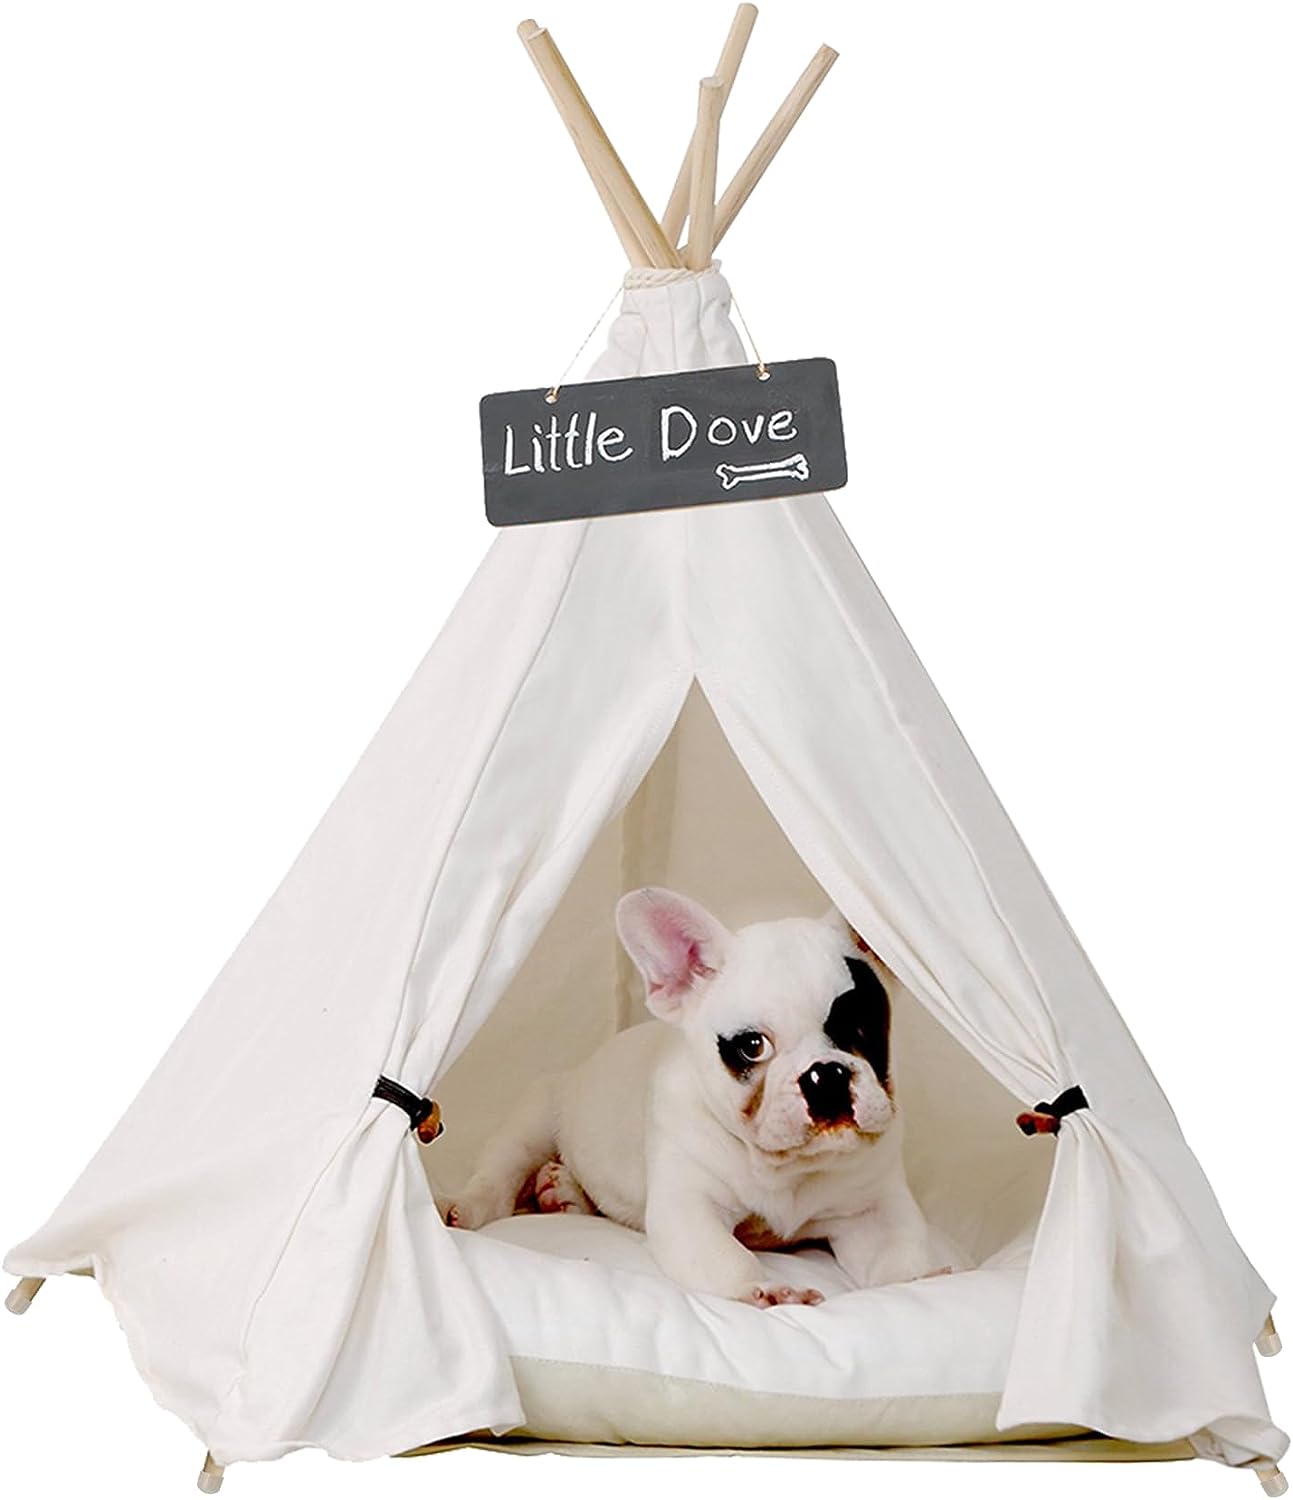 Little Dove Pet Teepee Bed